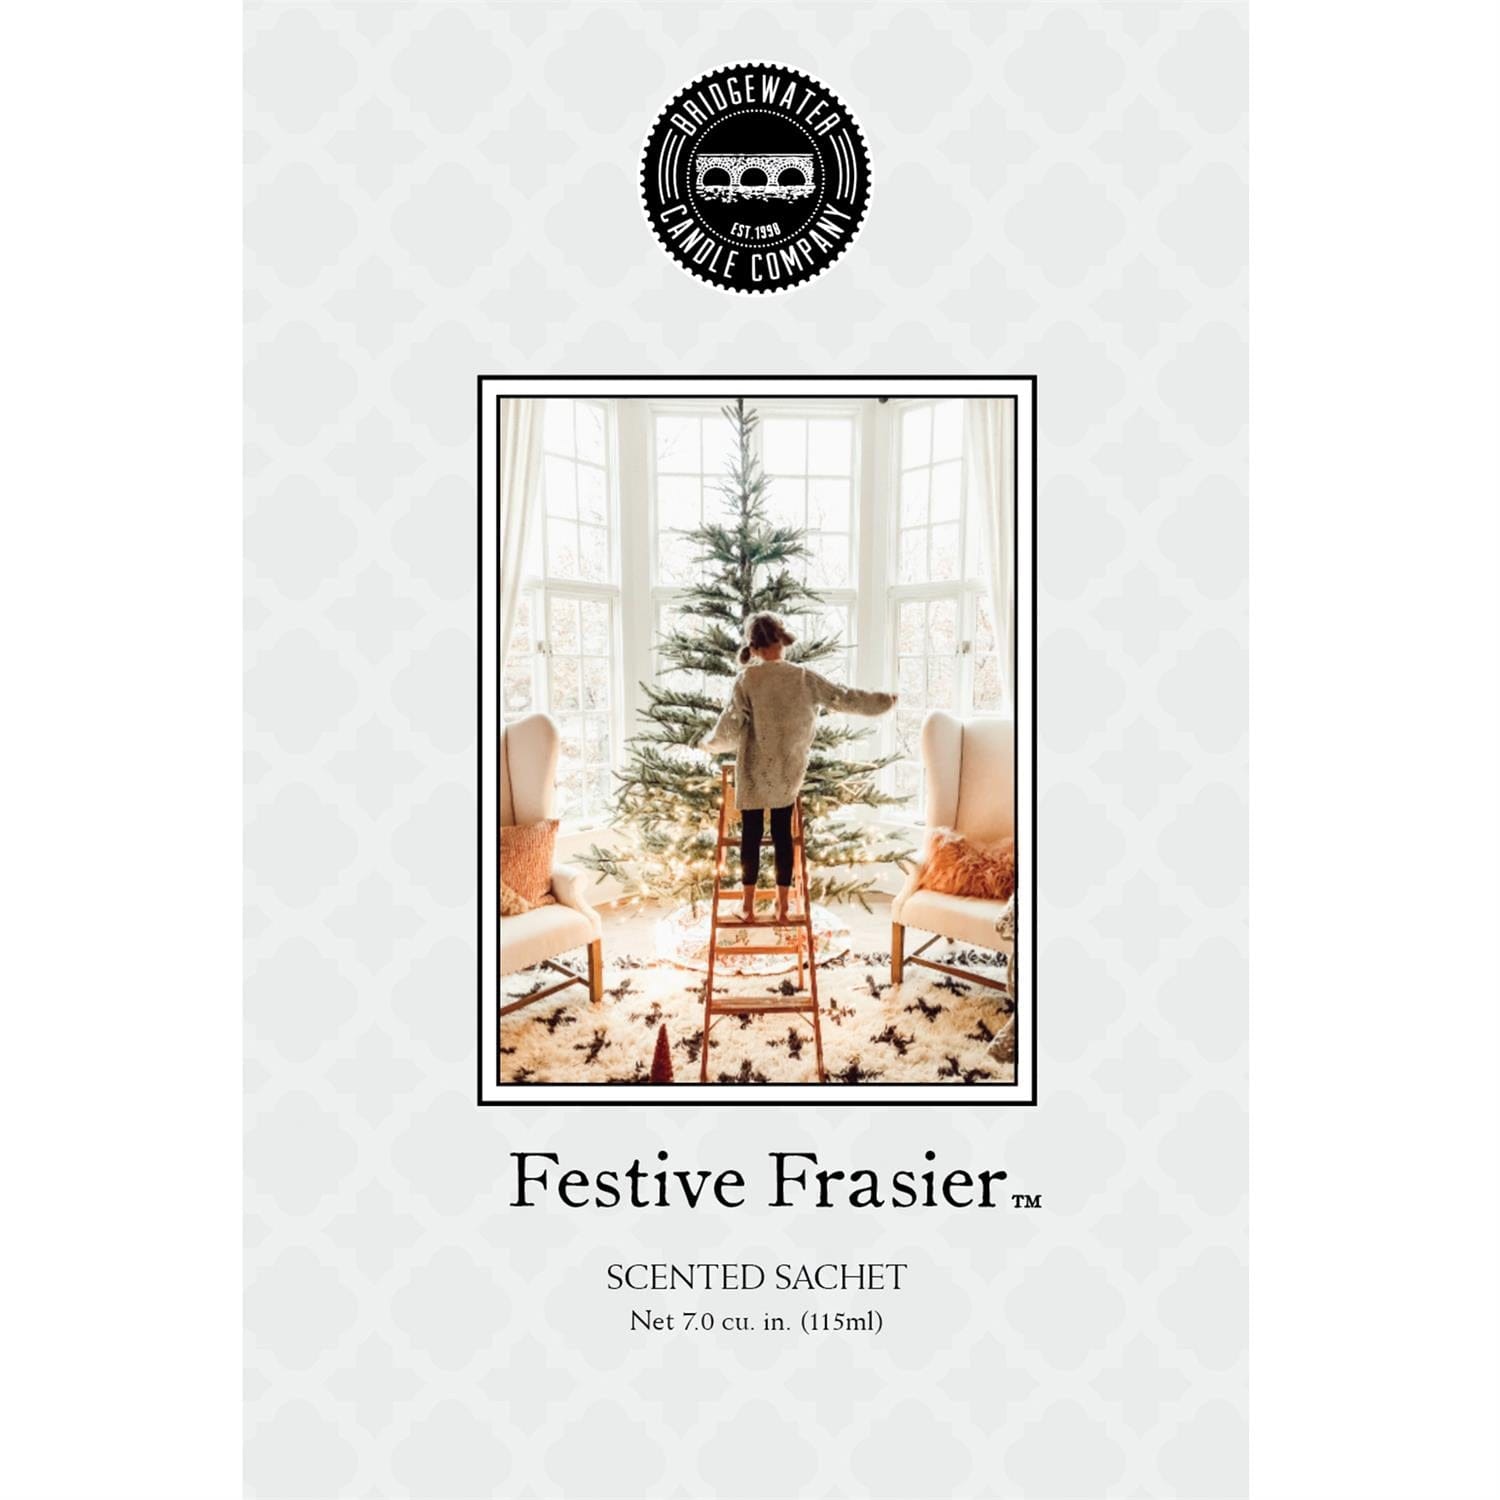 Sachets & Diffusers Festive Frasier - Scented Sachets - Bridgewater Candle Company BWC-106172